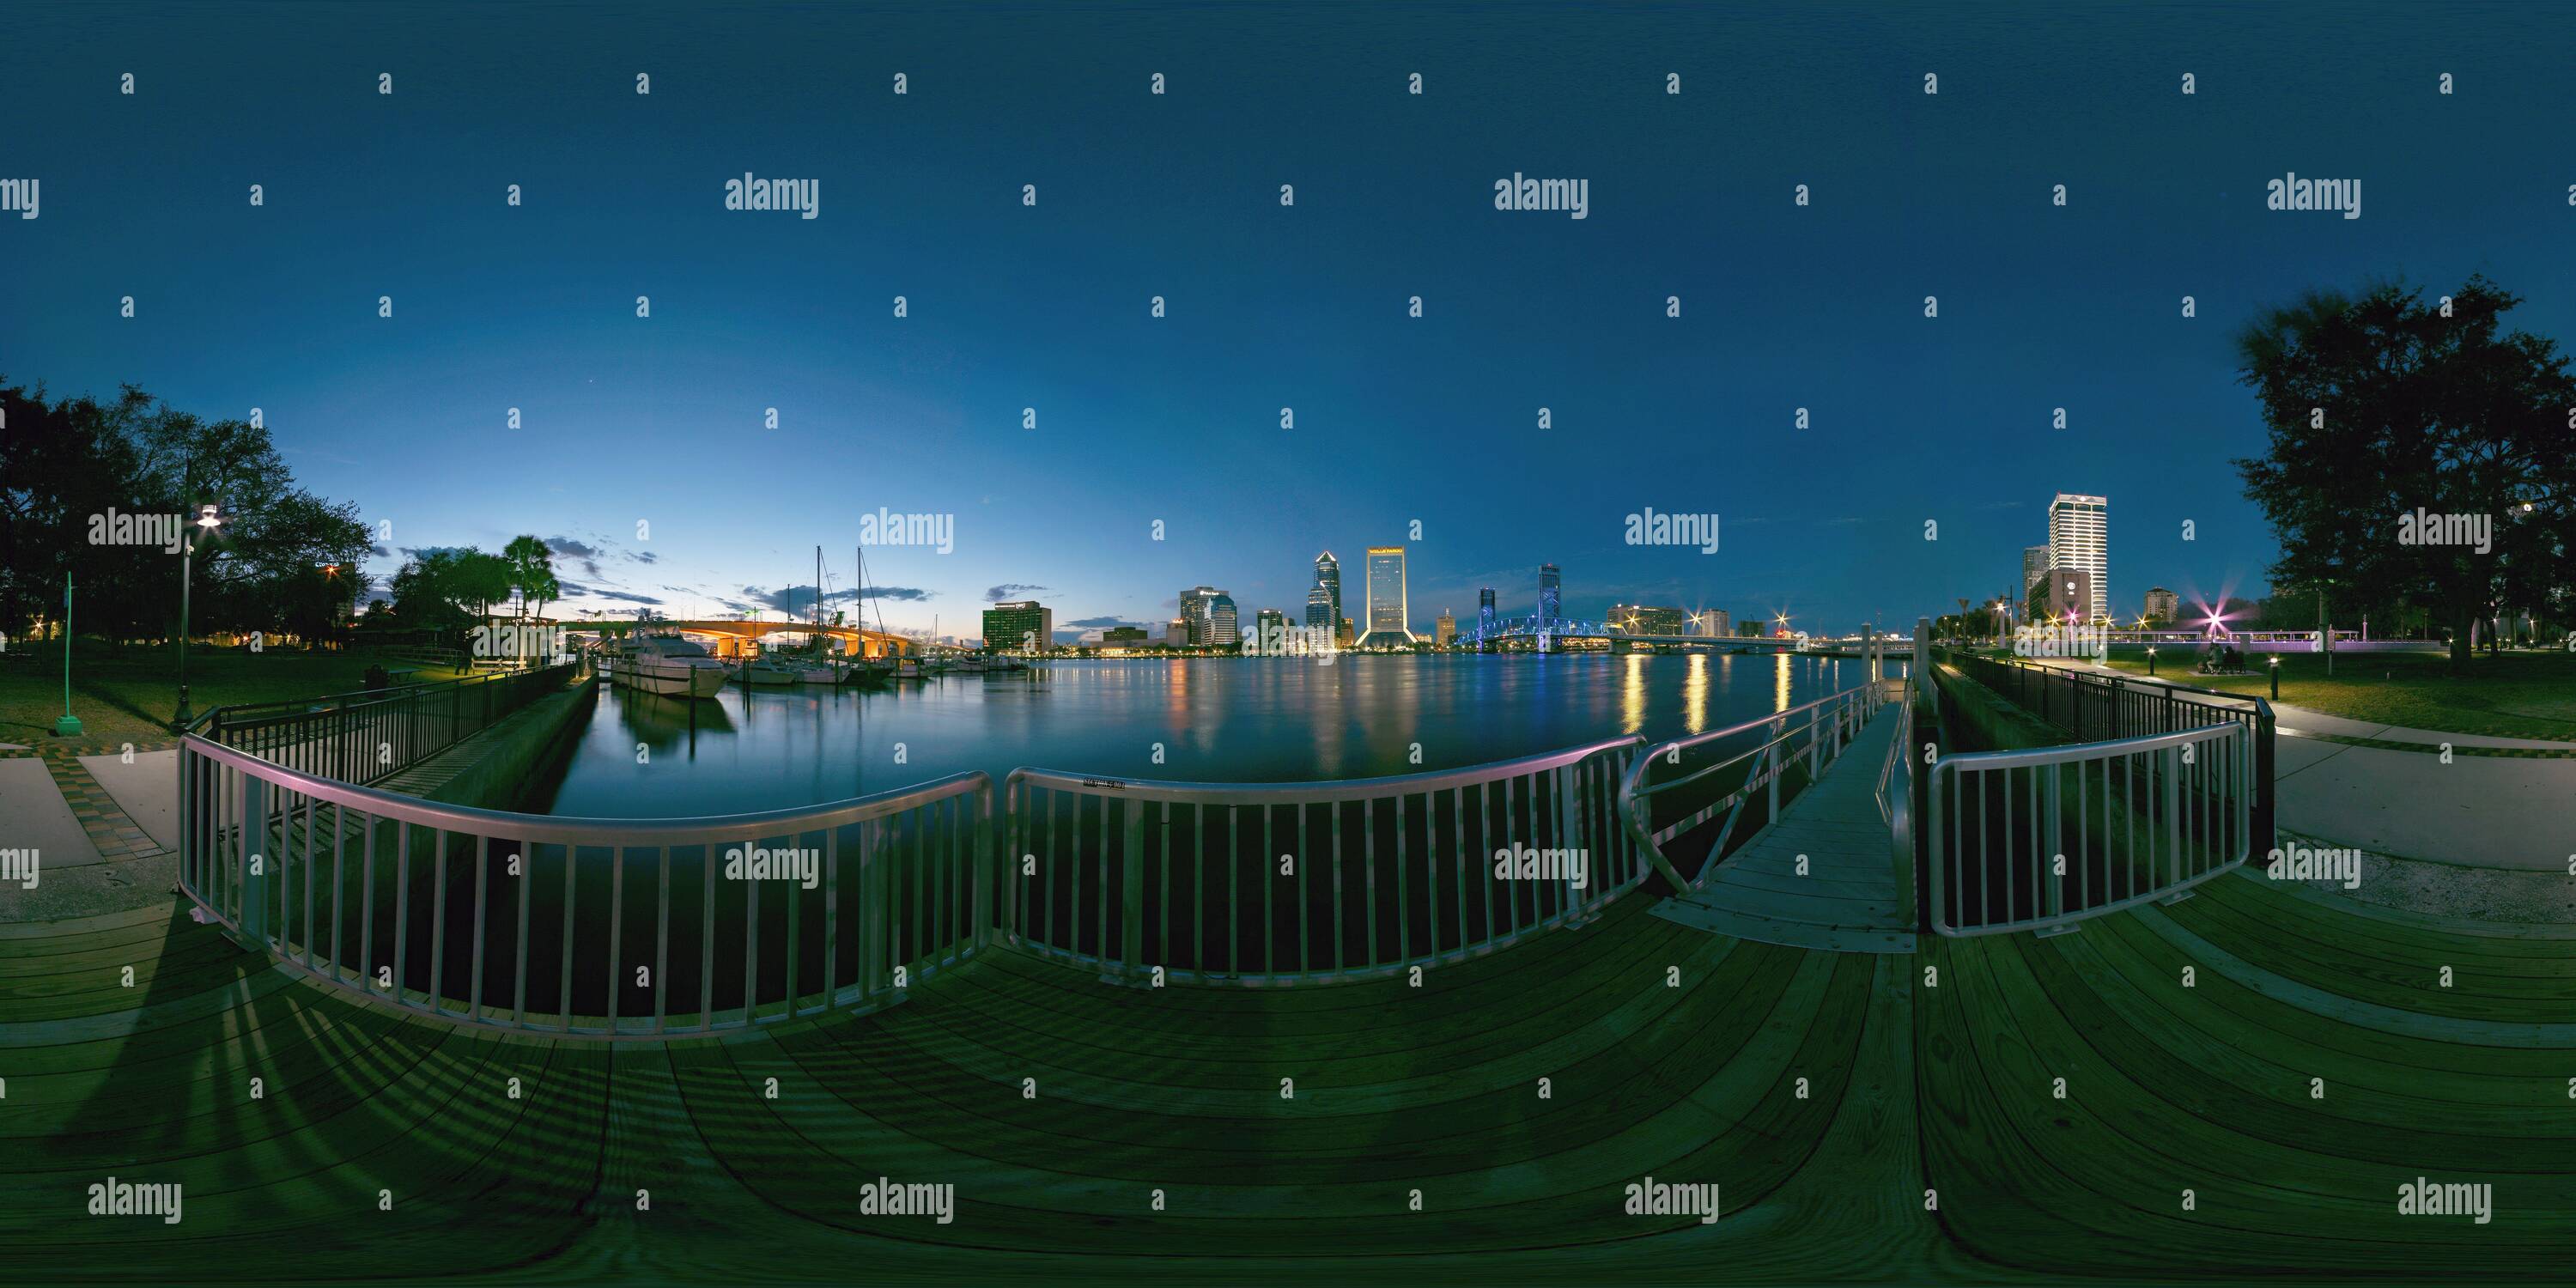 360 degree panoramic view of Downtown Jacksonville Florida in March 2020 from Friendship Fountain Water Taxi landing at Dusk - 360 Spherical Panorama - Streetview Photosphere